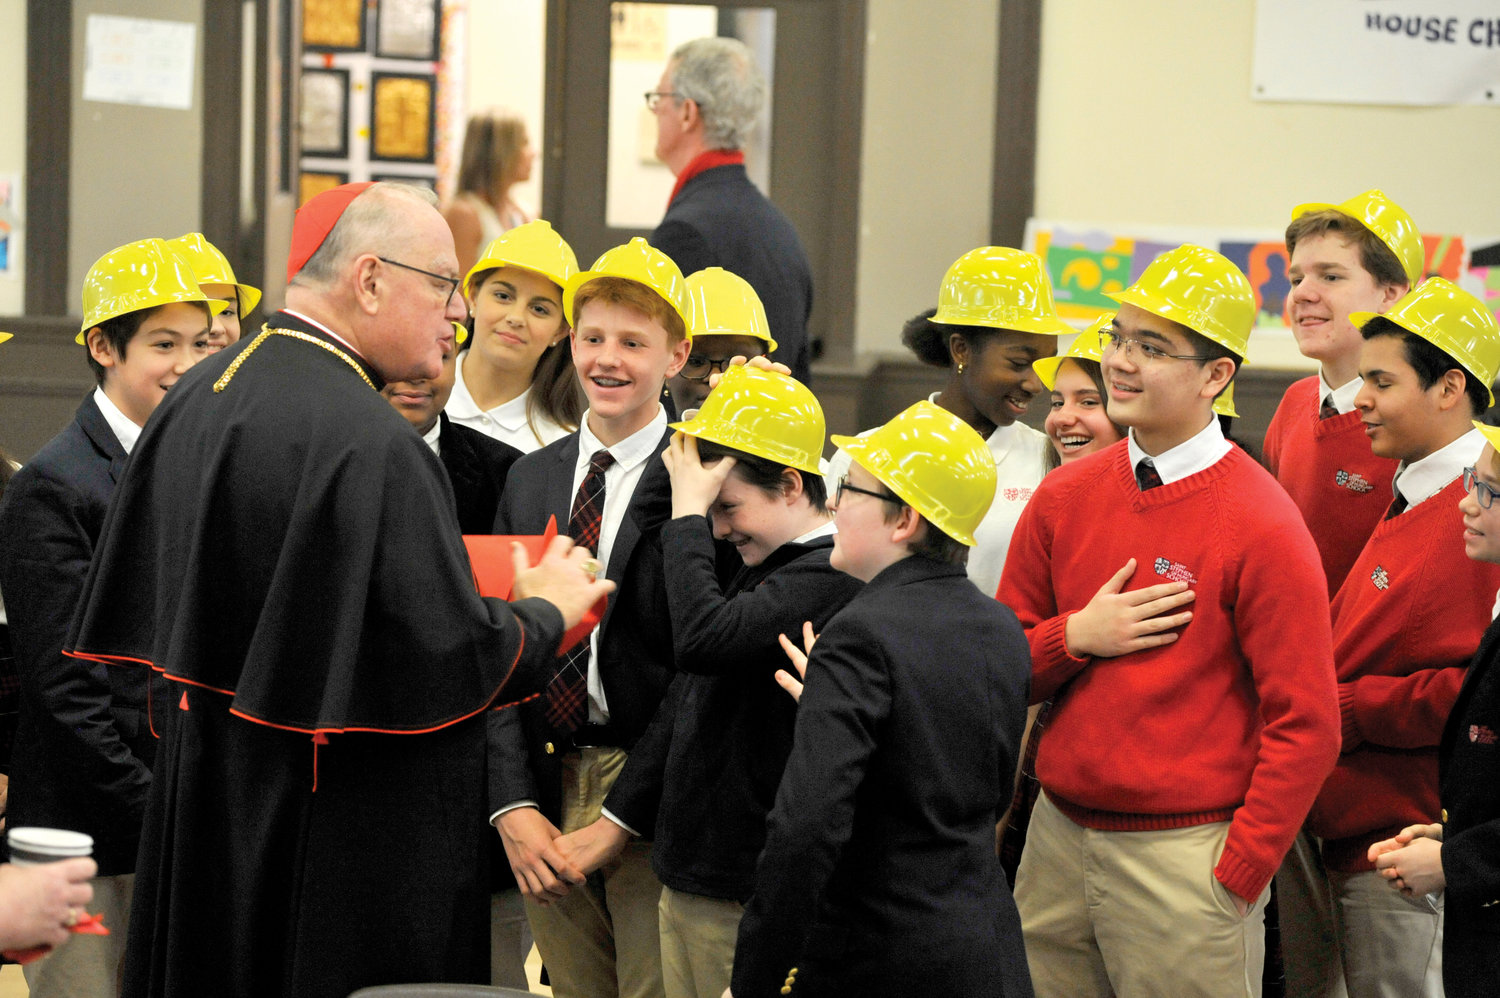 Cardinal Dolan shares a festive moment with students at St. Stephen of Hungary School in Manhattan March 11.